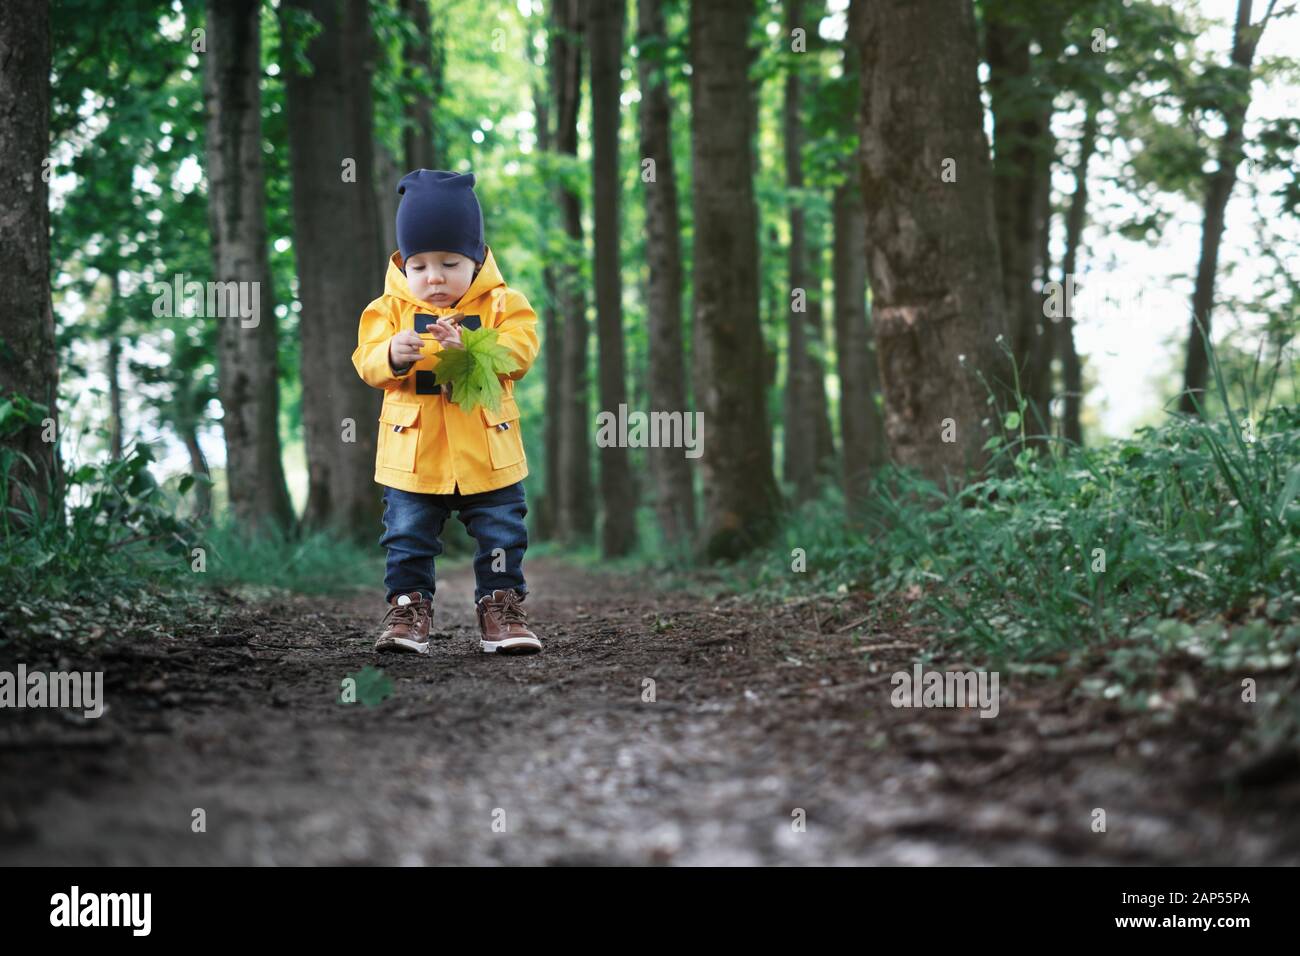 Small boy in yellow jacket in summer park Stock Photo